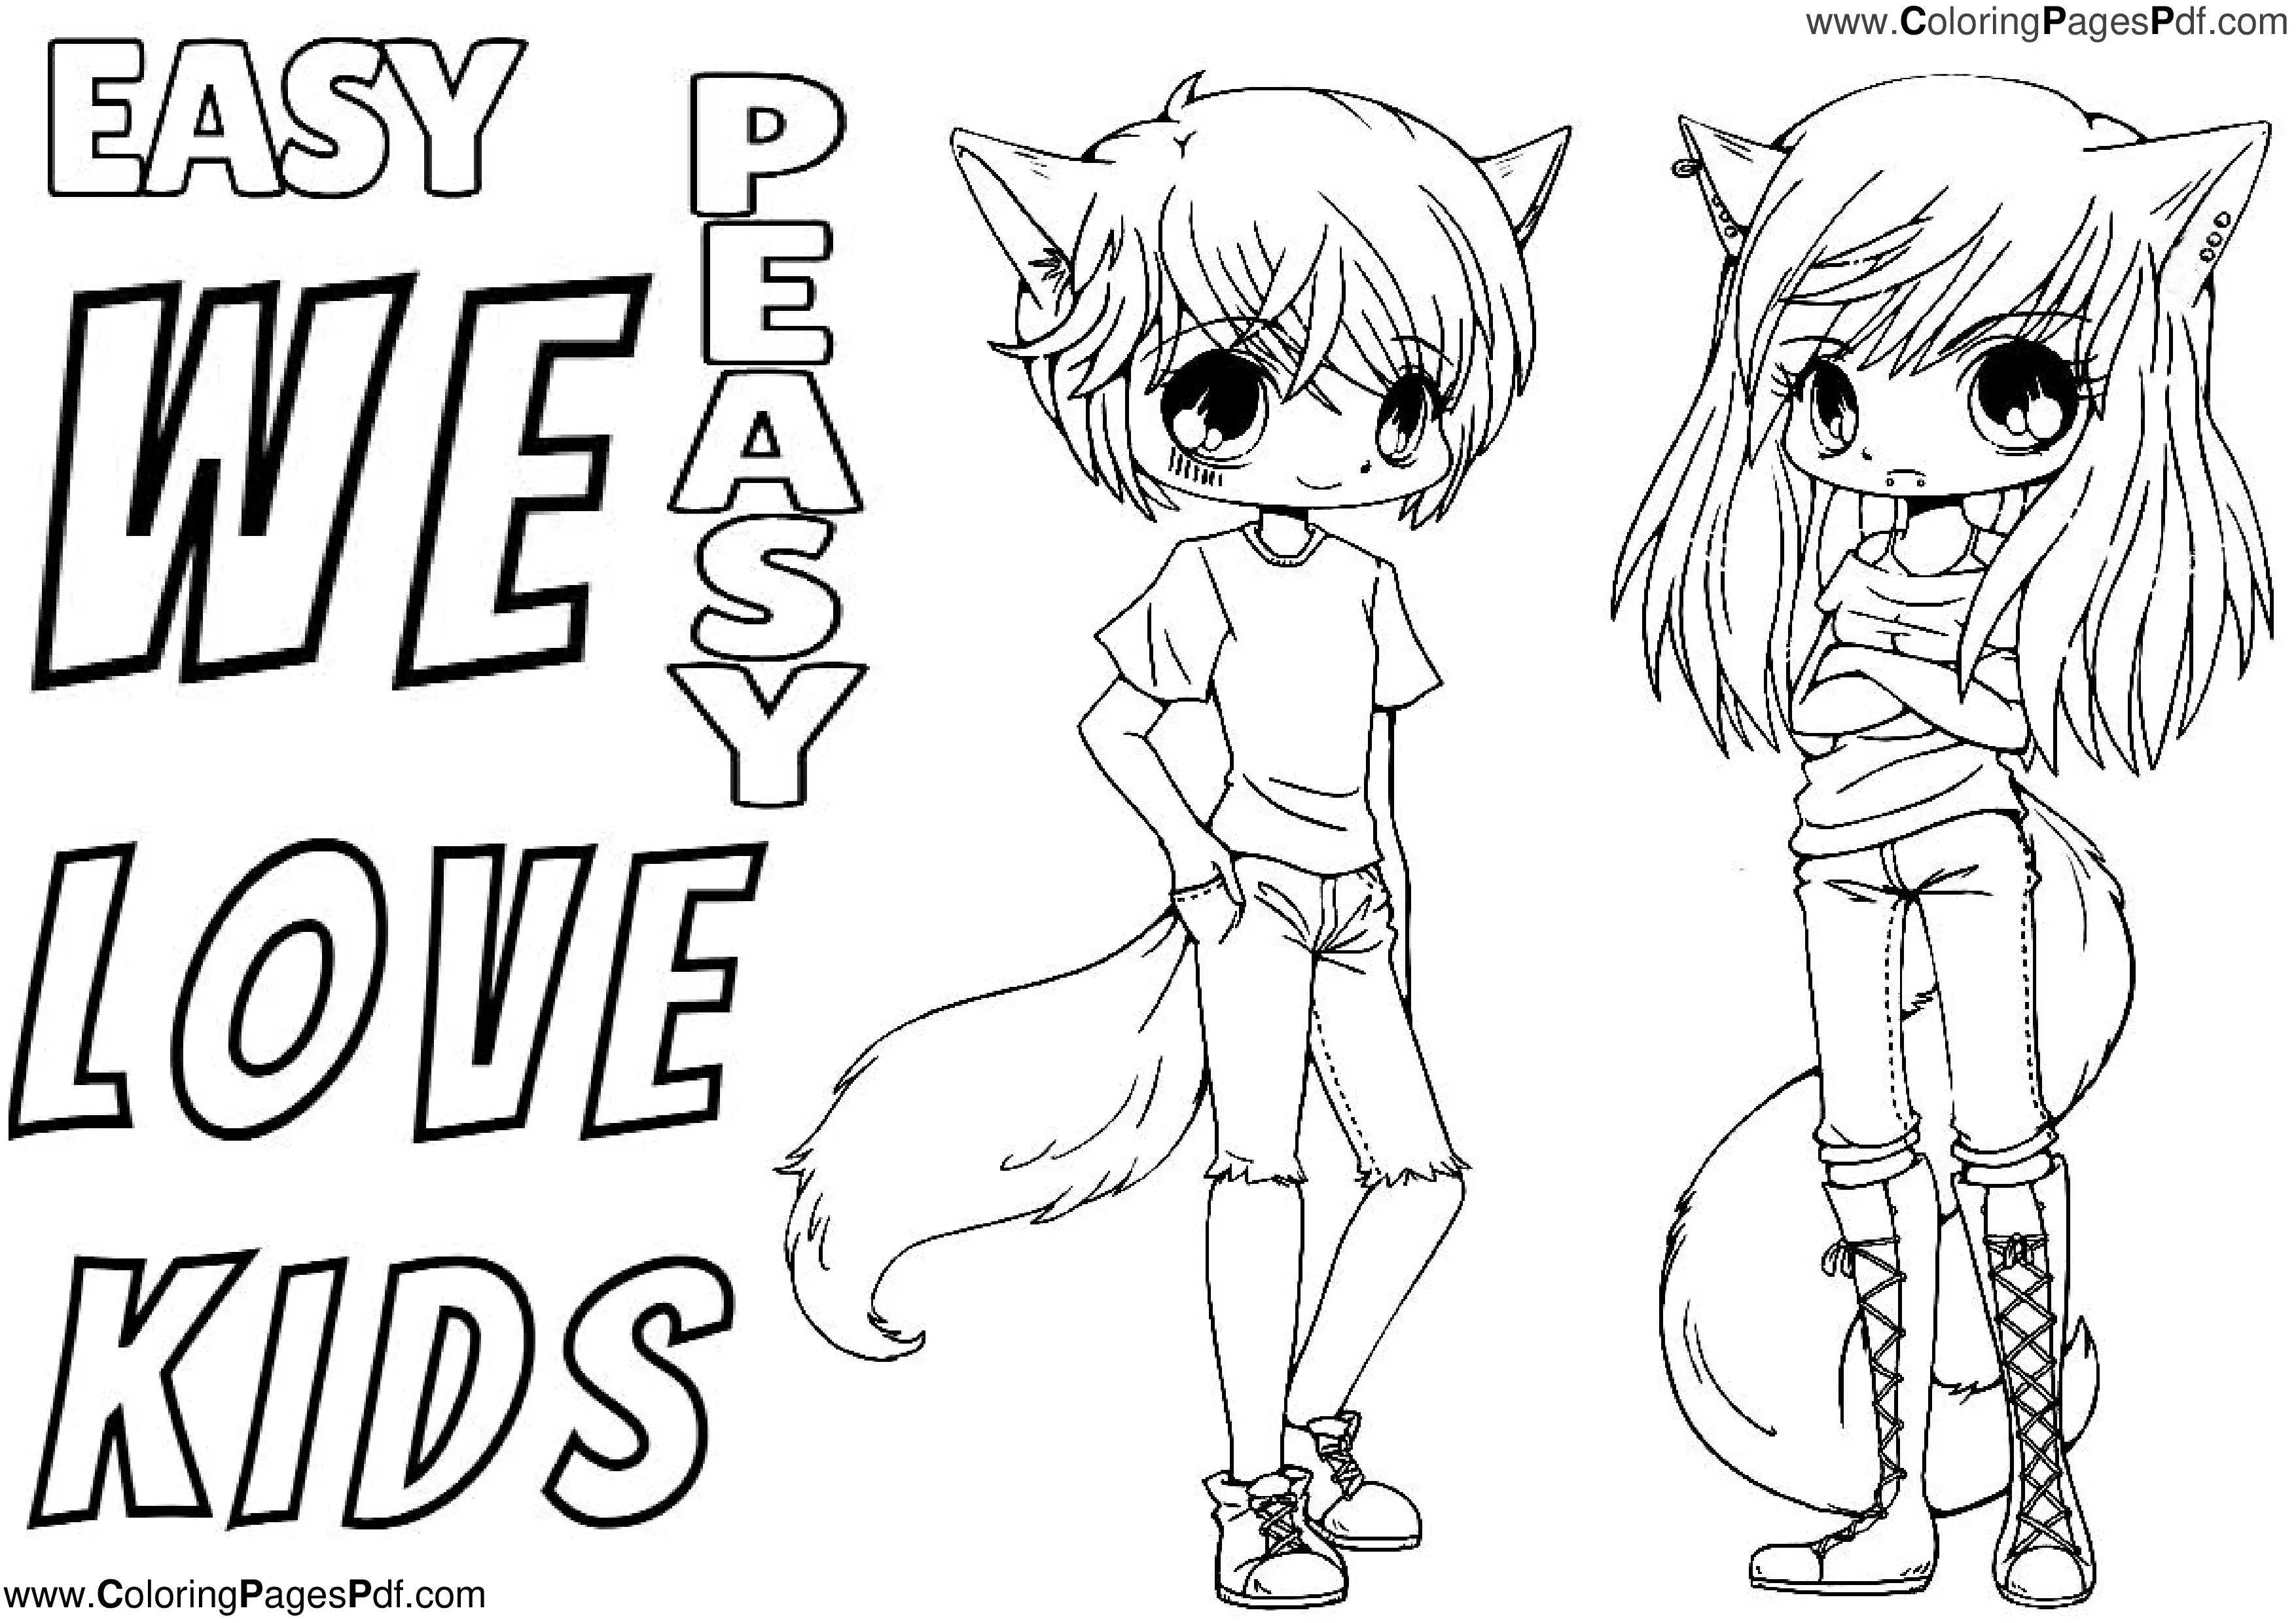 Anime colouring pages for kids